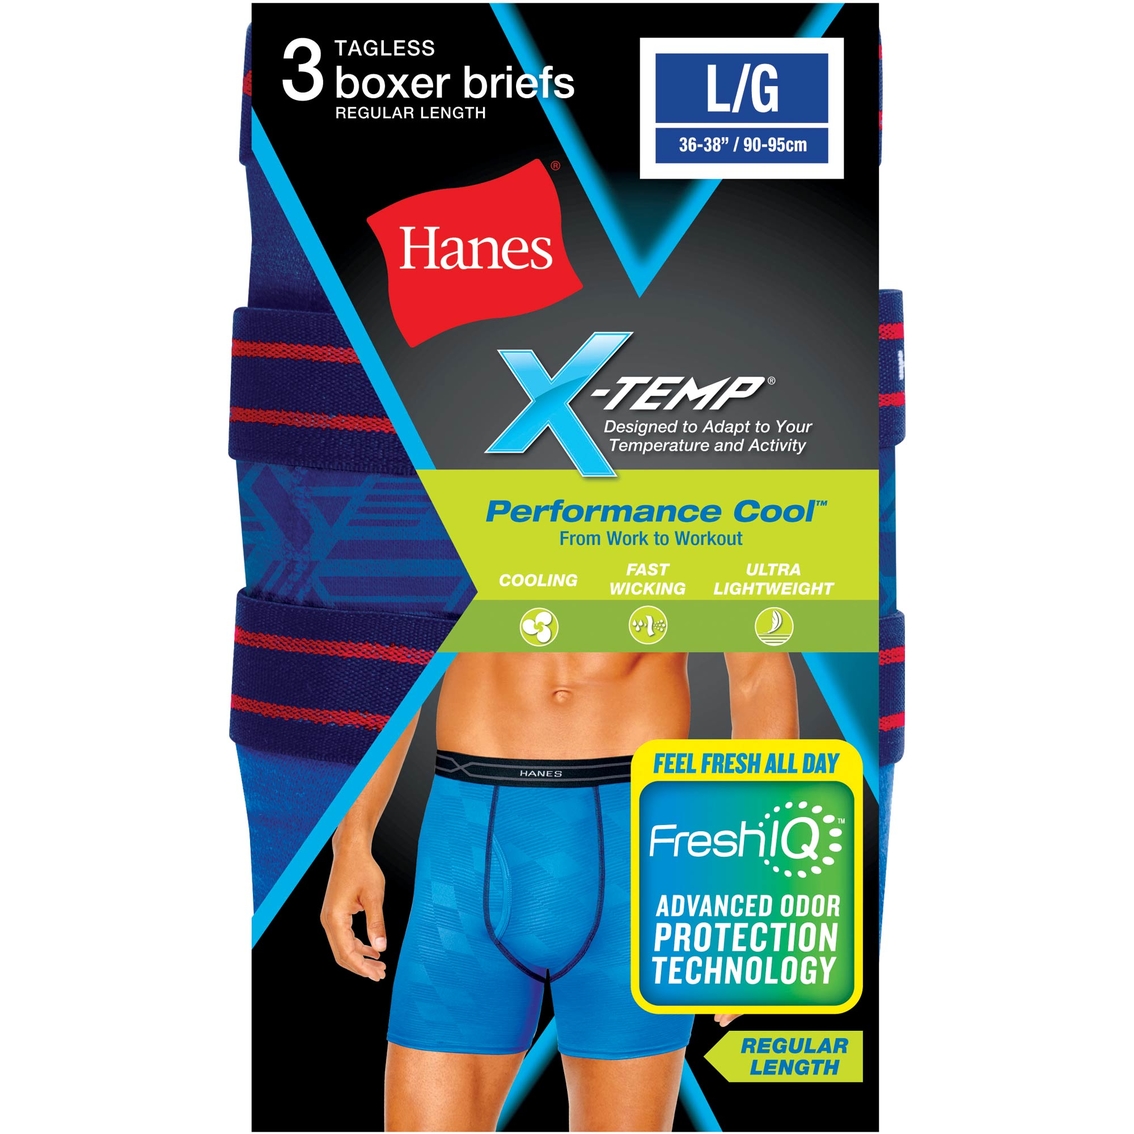 Hanes Performance Cool X-temp Embossed Boxer Brief 3k.